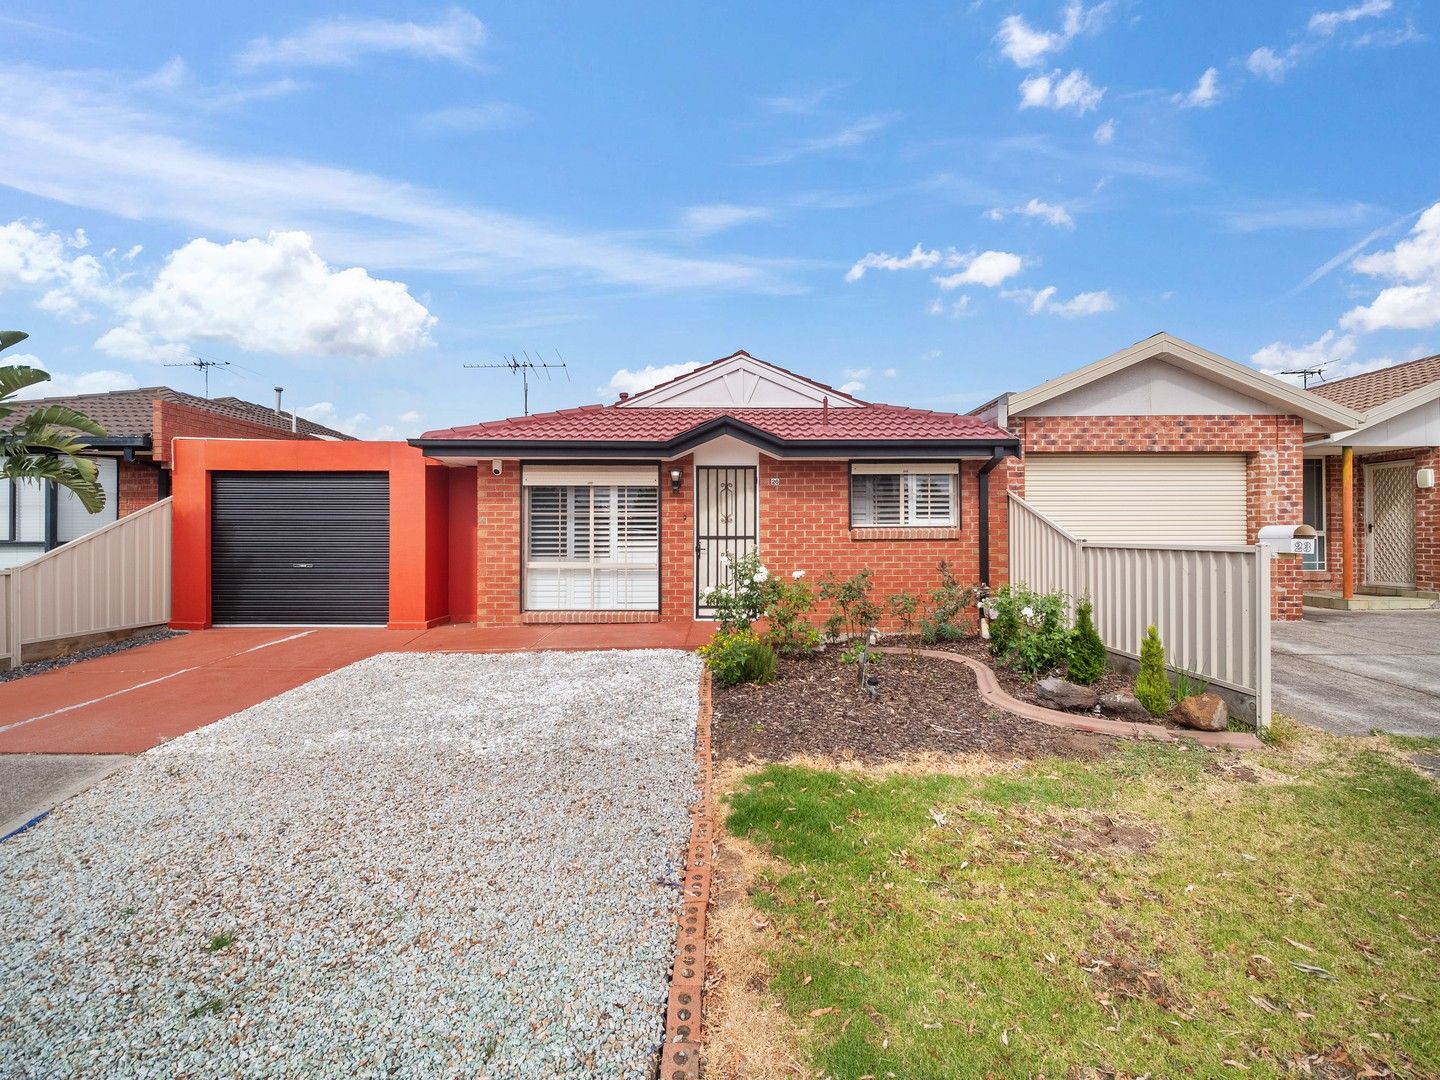 3 bedrooms House in 26 Cottrell Court DELAHEY VIC, 3037